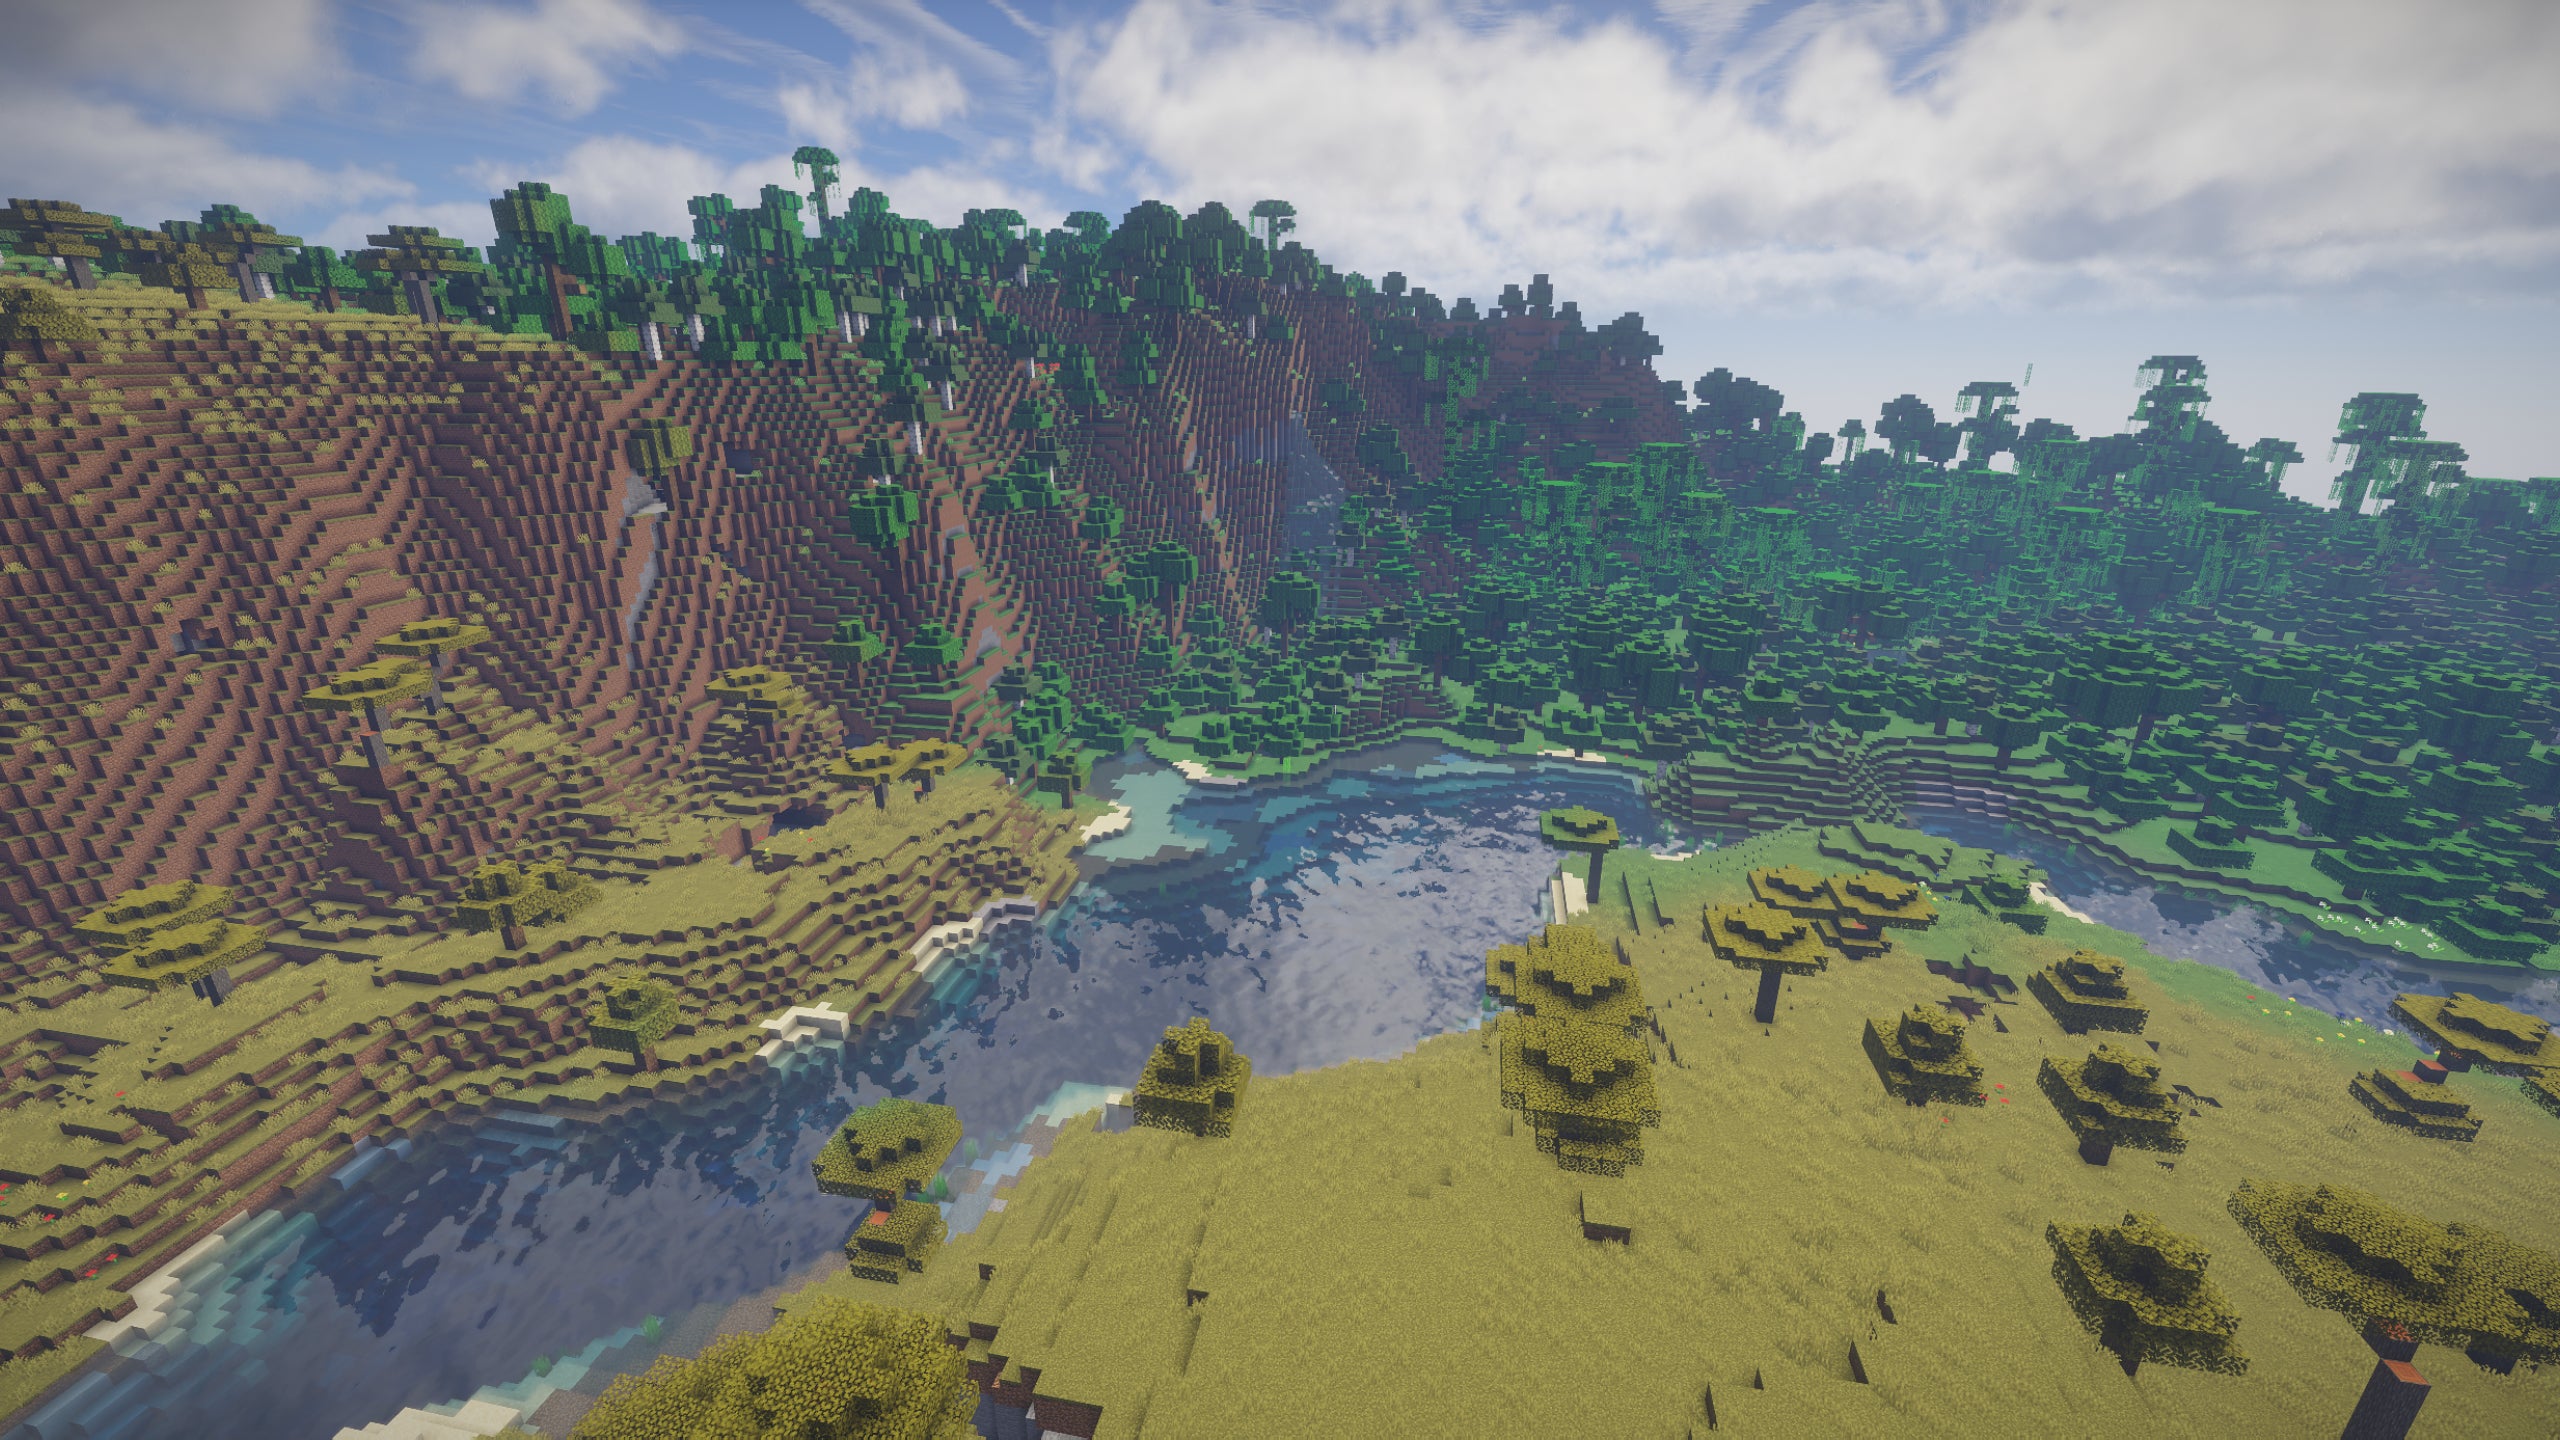 A river on the edge of a forest in Minecraft, with extreme hills on the left in the distance.